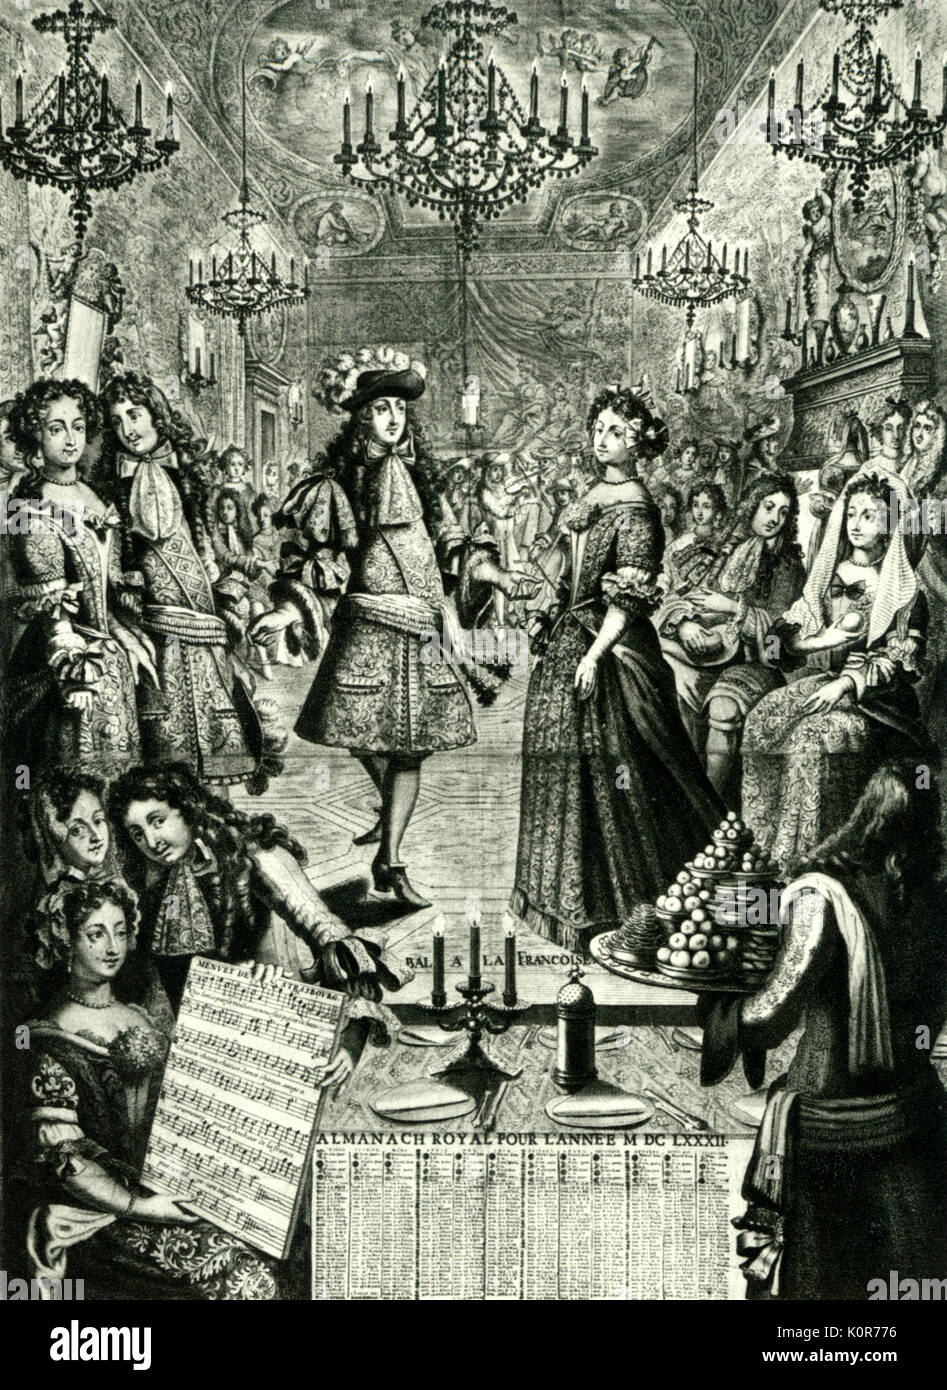 Marc-Antoine Charpentier in engraving by Pierre Landry entitled 'The Royal Almanac of 1682' and celebrating L.XIV's military victory in Alsace. Score is excerpt from Menuet de Strasbourg by Charpentier. Louis XIV dancing minuet. Ball at Versailles. Thought to be Marc-Antoine Charpentier holding score and only portrait ini existence-according to MA Charpentier Society. Stock Photo